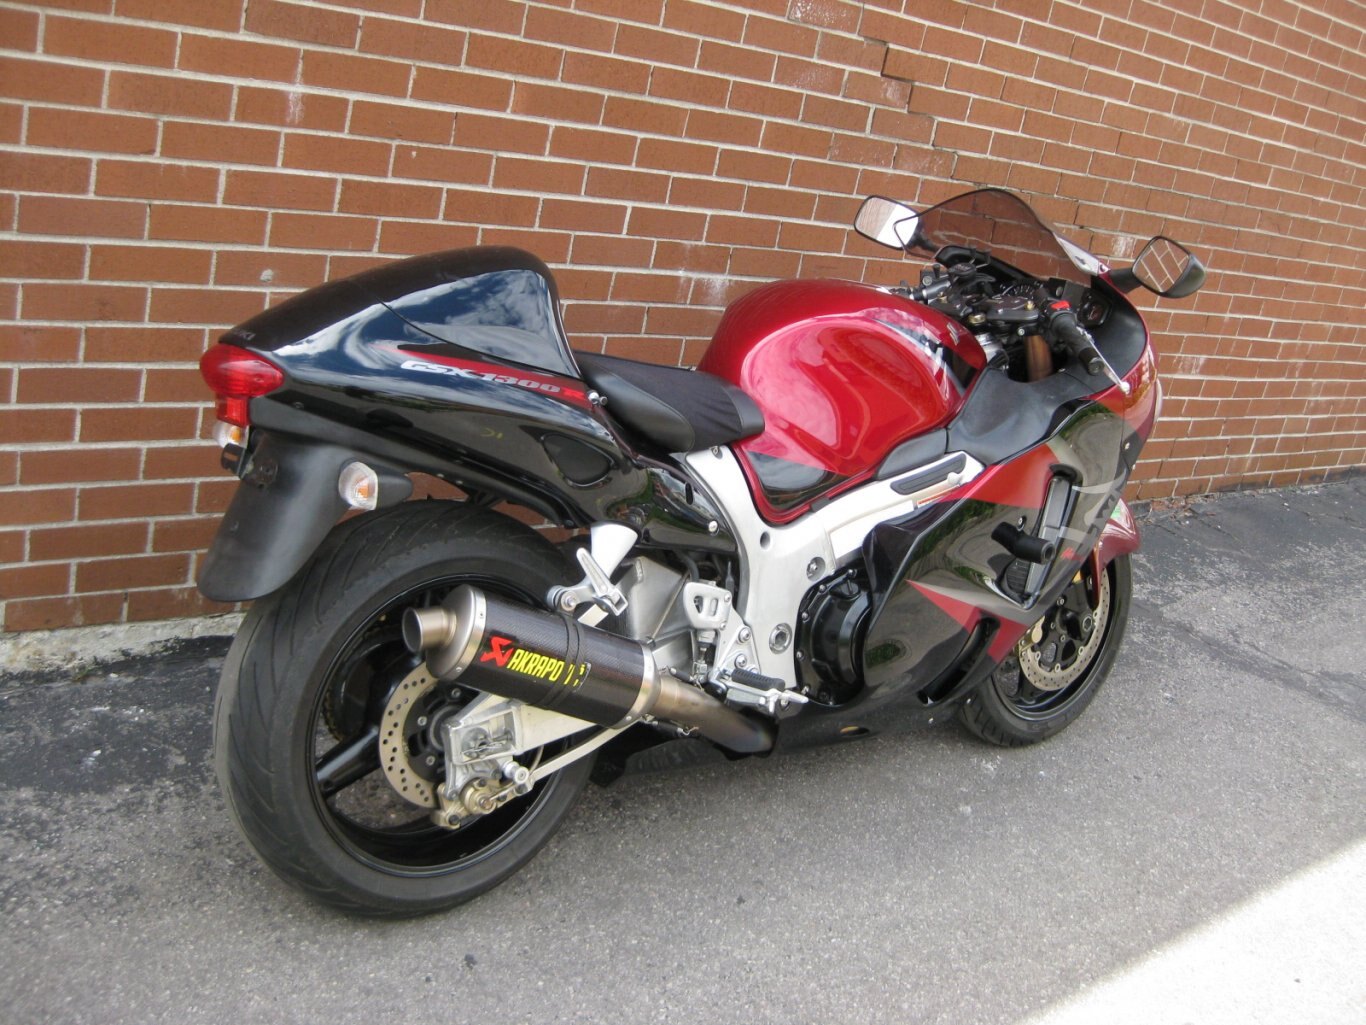 2006 Suzuki GSX1300R Hayabusa THIS SLEEK, LONG, LOW, MEAN, MACHINE RATED THE FASTEST PRODUCTION MOTORCYCLE FOR 2006 WITH 155.9 HORSEPOWER